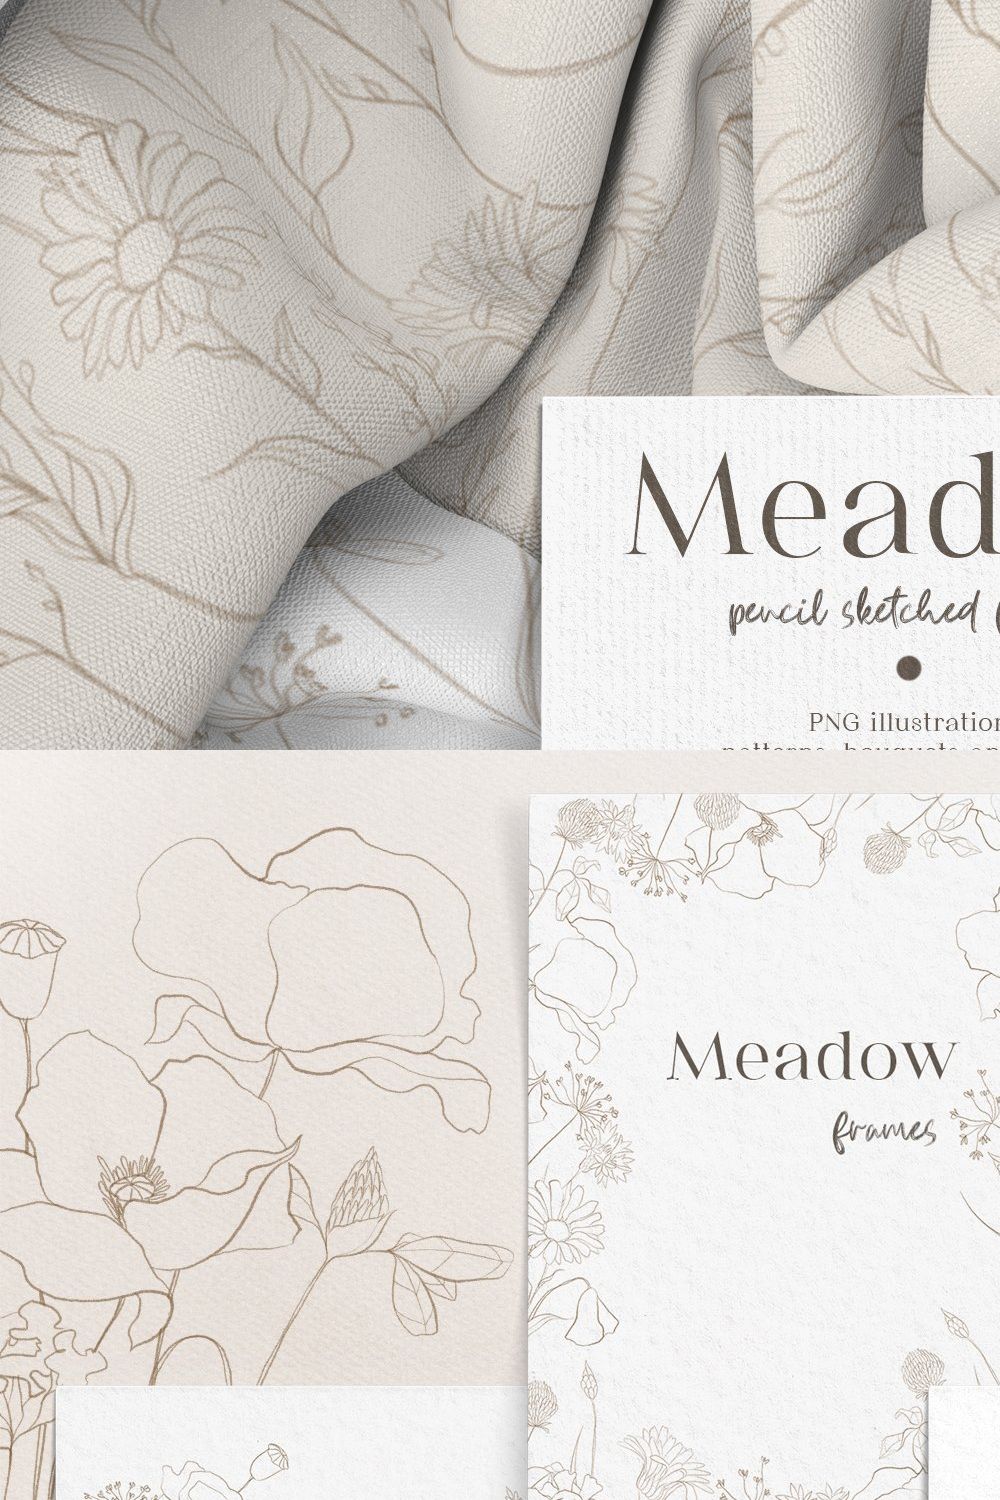 Meadow pencil sketched flowers pinterest preview image.